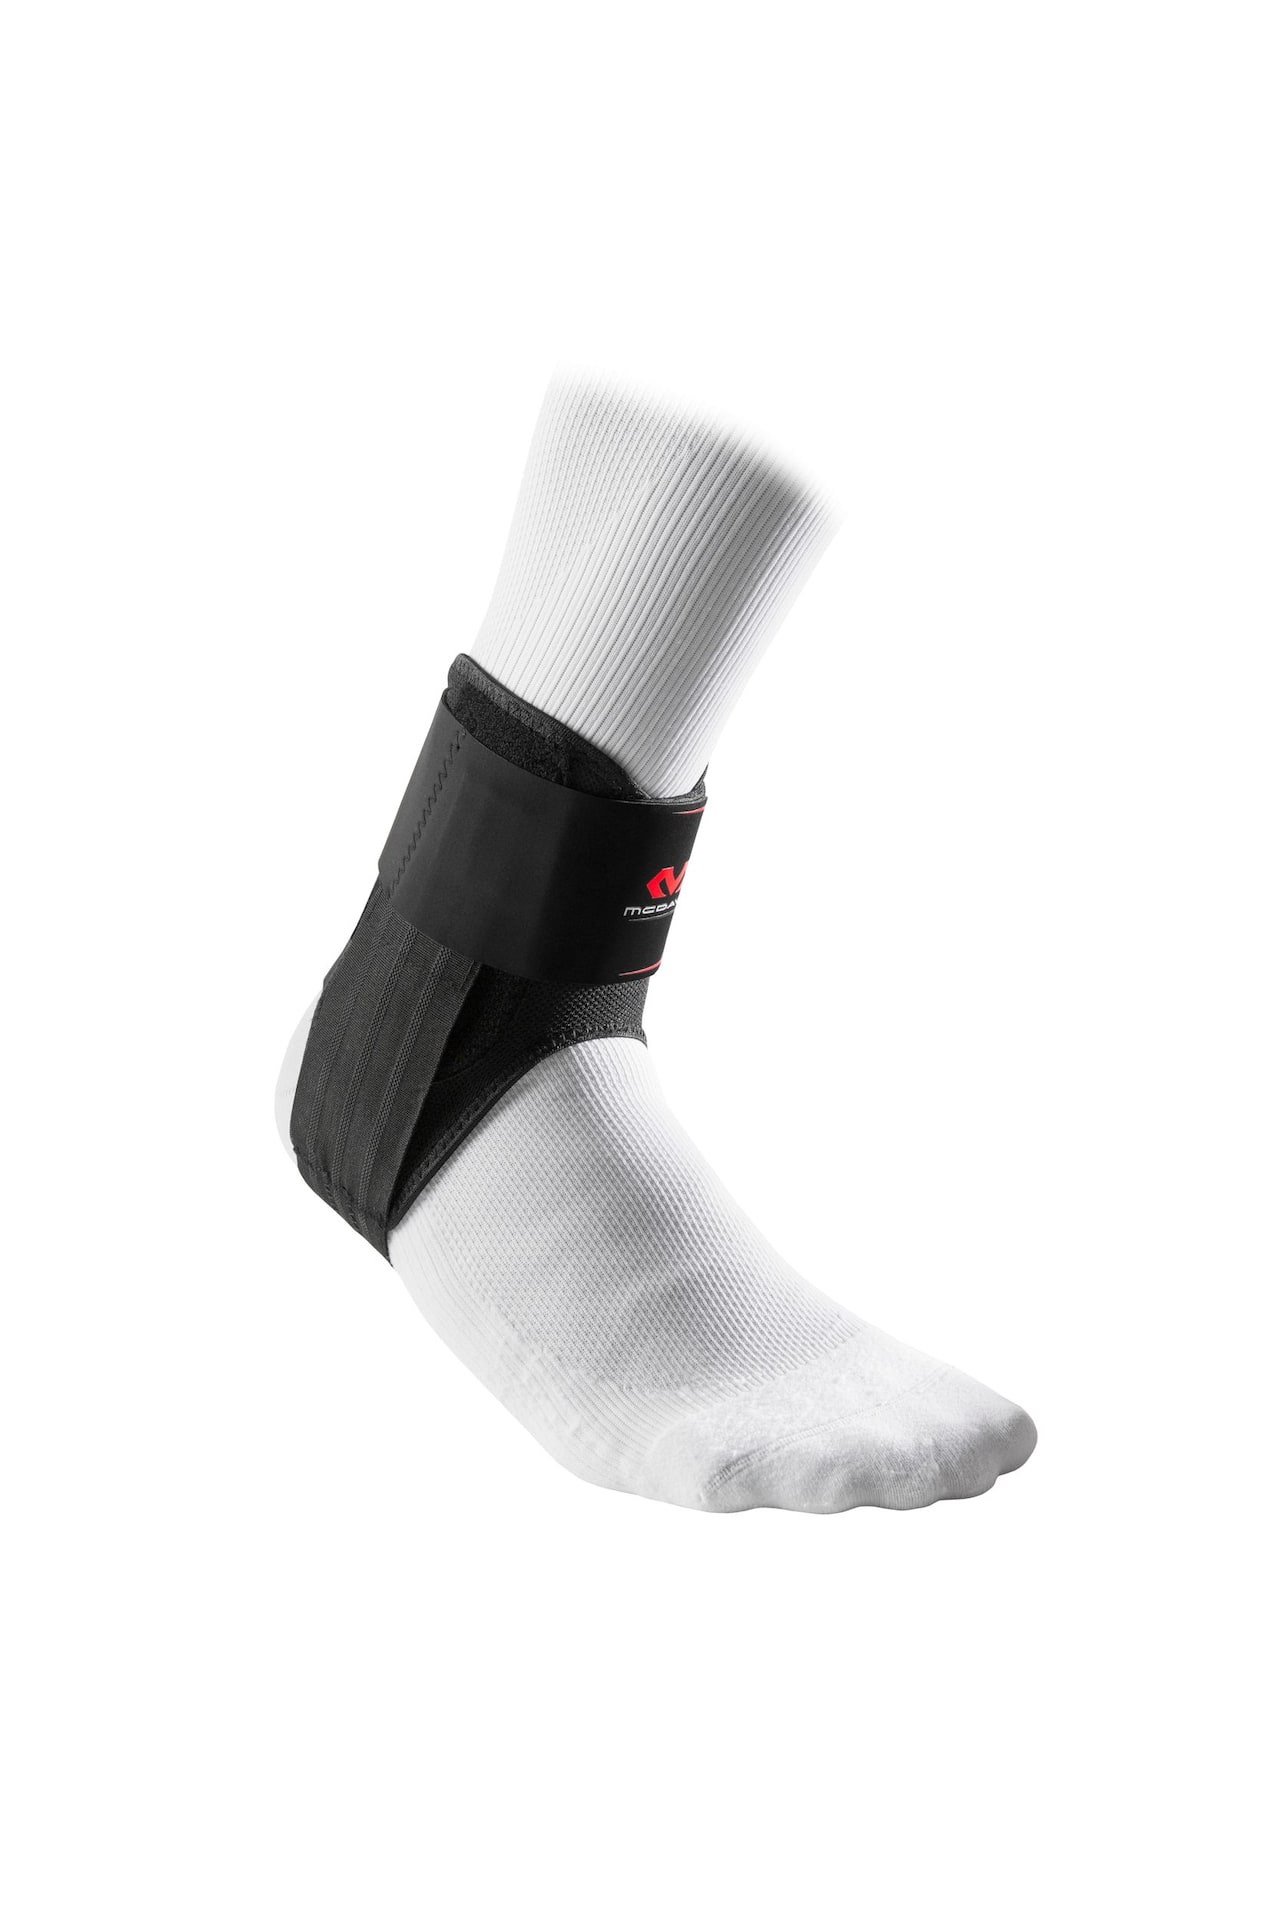 McDavid Stealth Ankle Brace with Minimal Coverage & Flex-Support